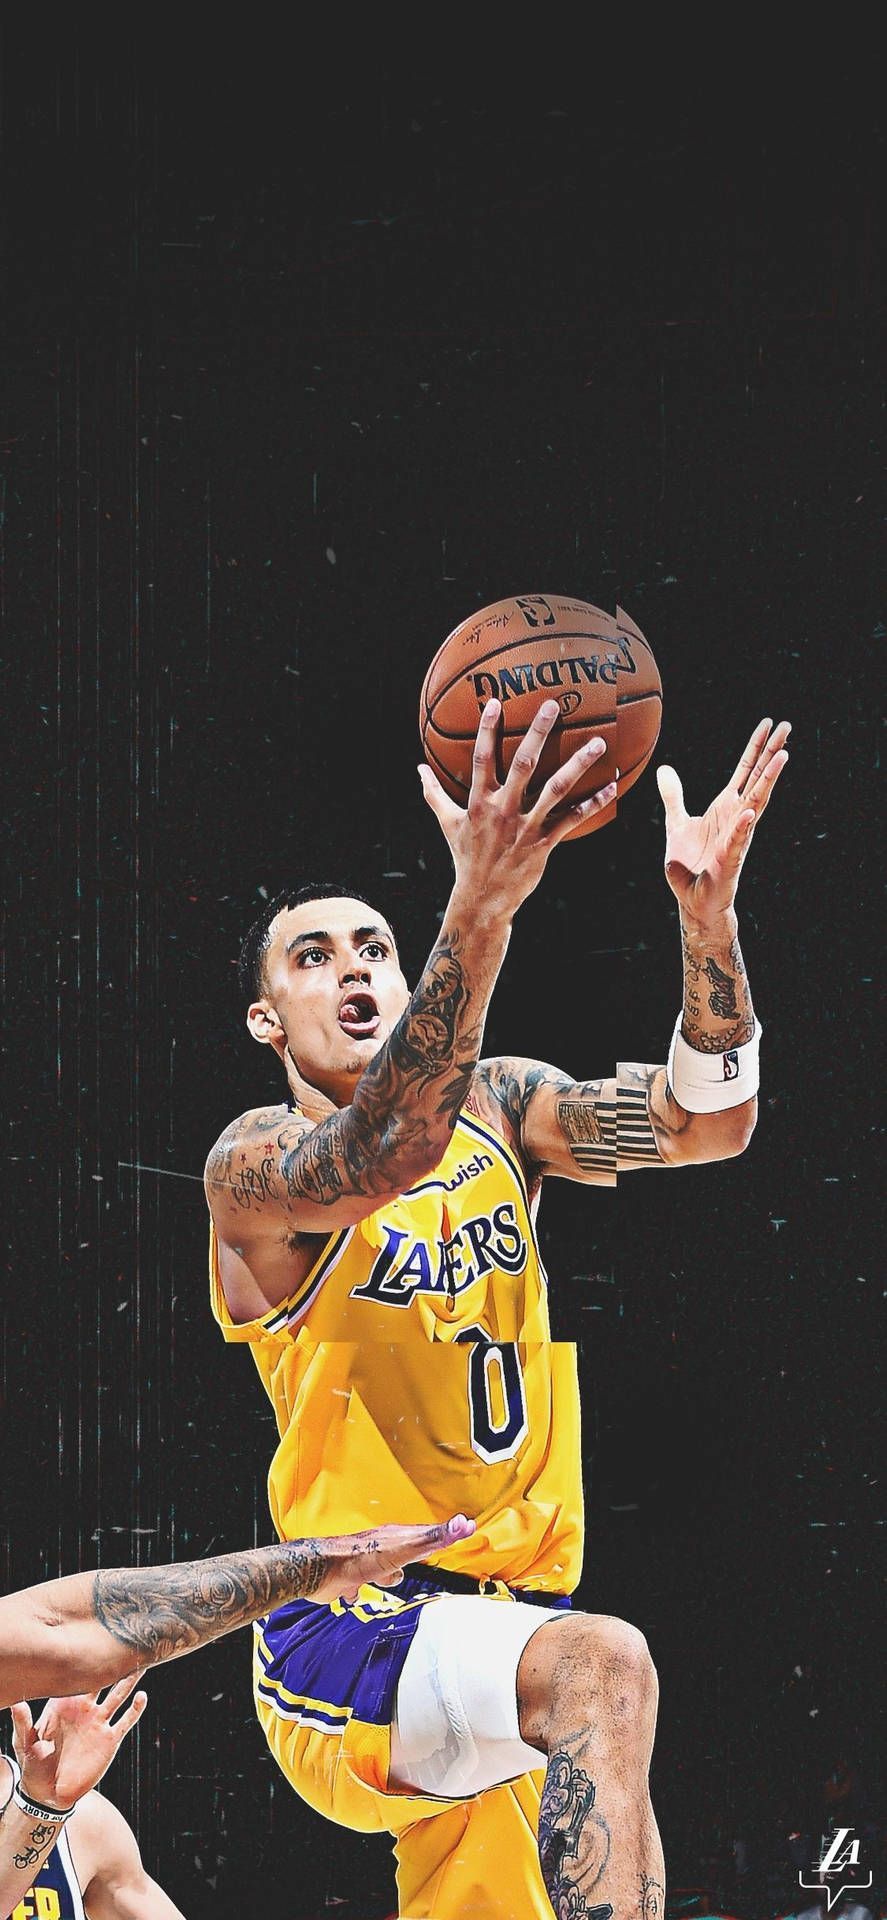 Wallpaper of Alex Caruso playing basketball for the Lakers - Los Angeles Lakers